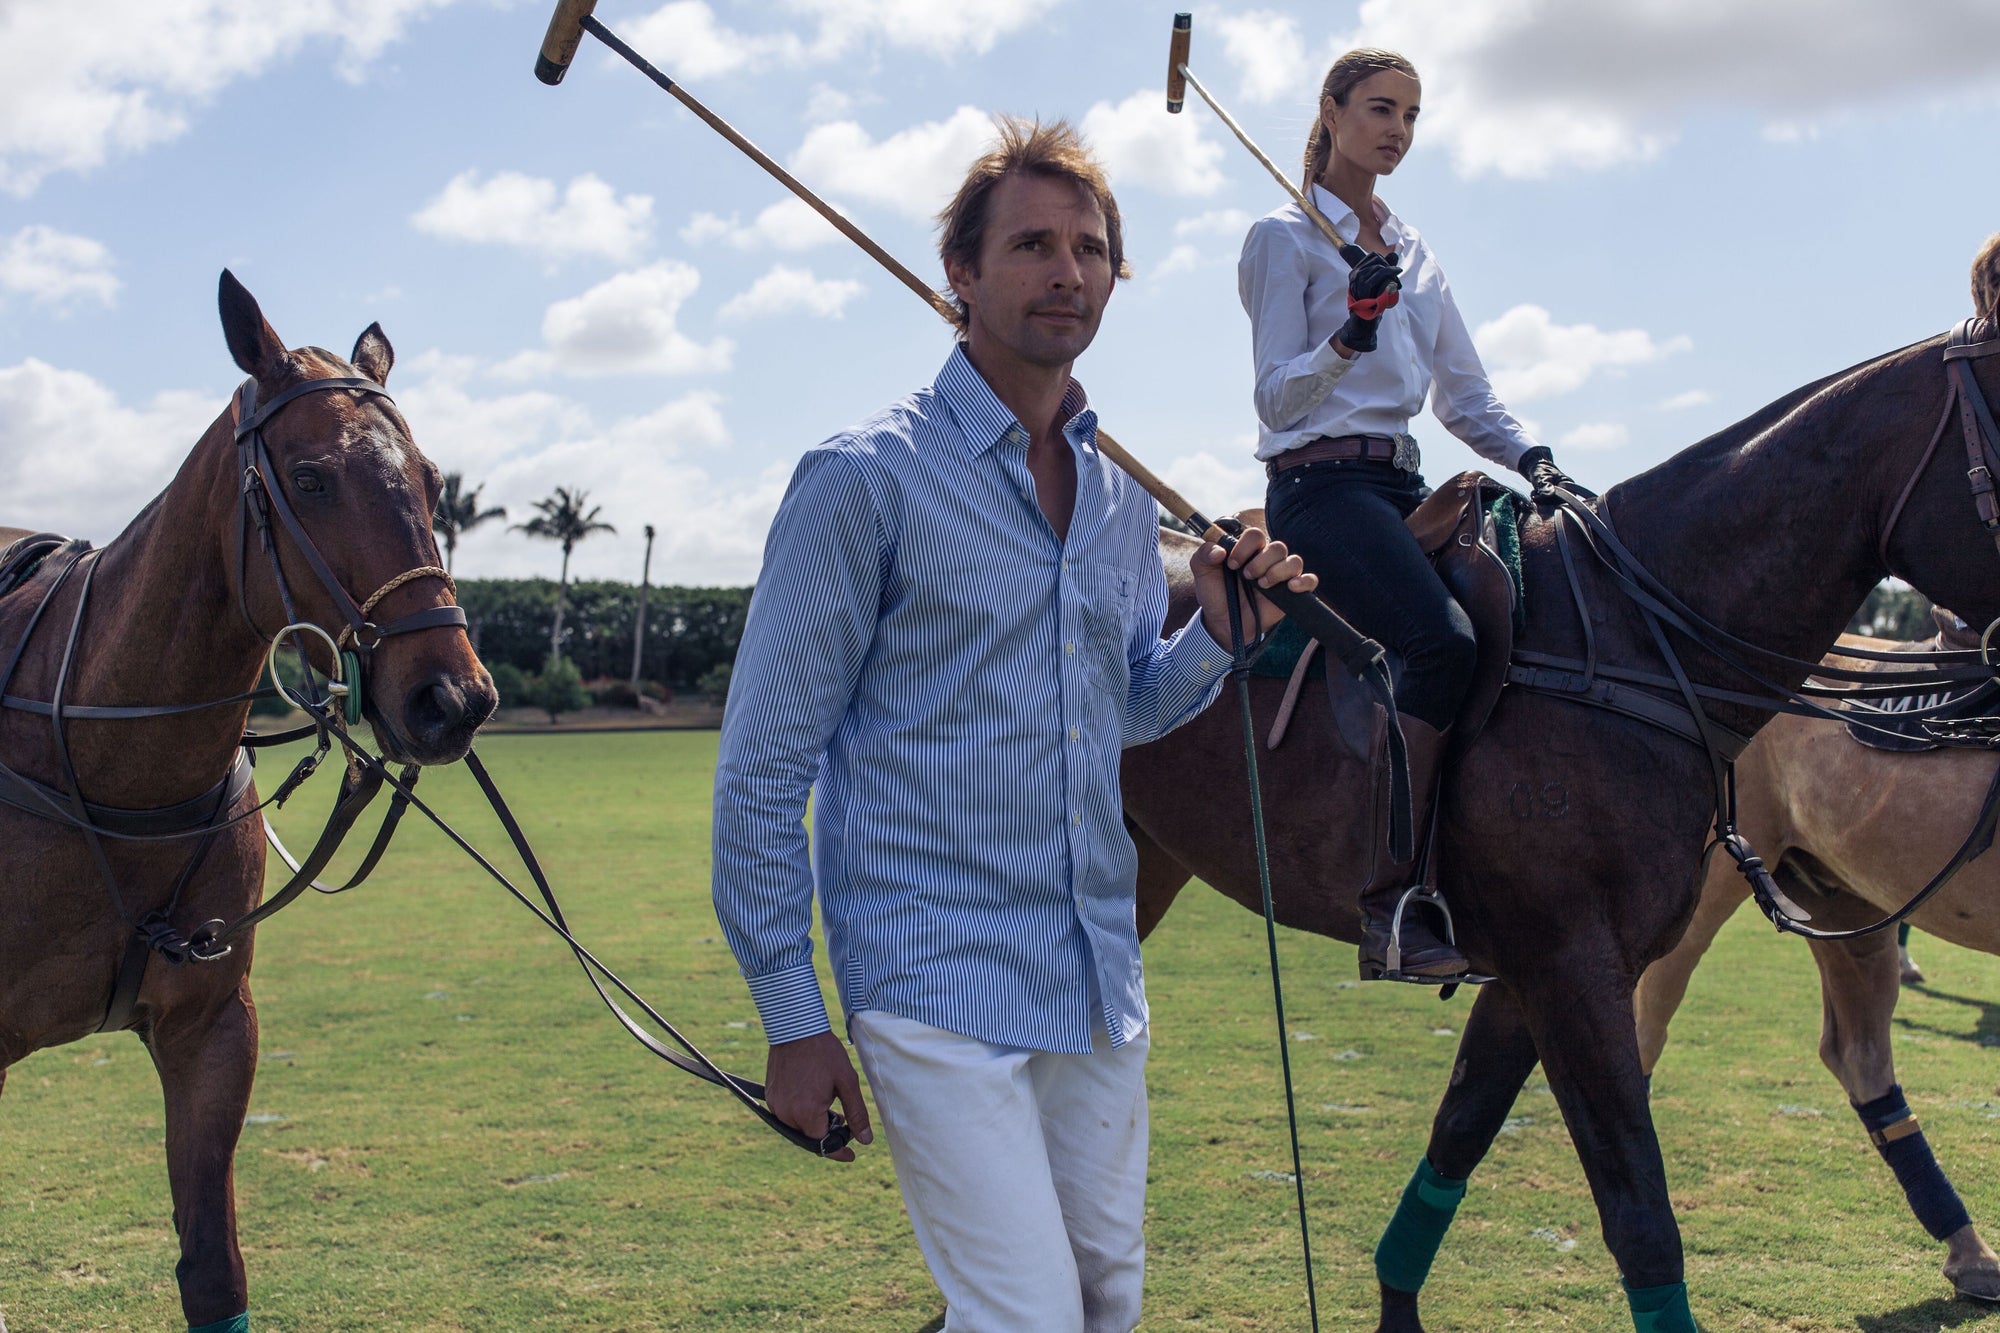 A Glimpse into the Life of a Professional Polo Player